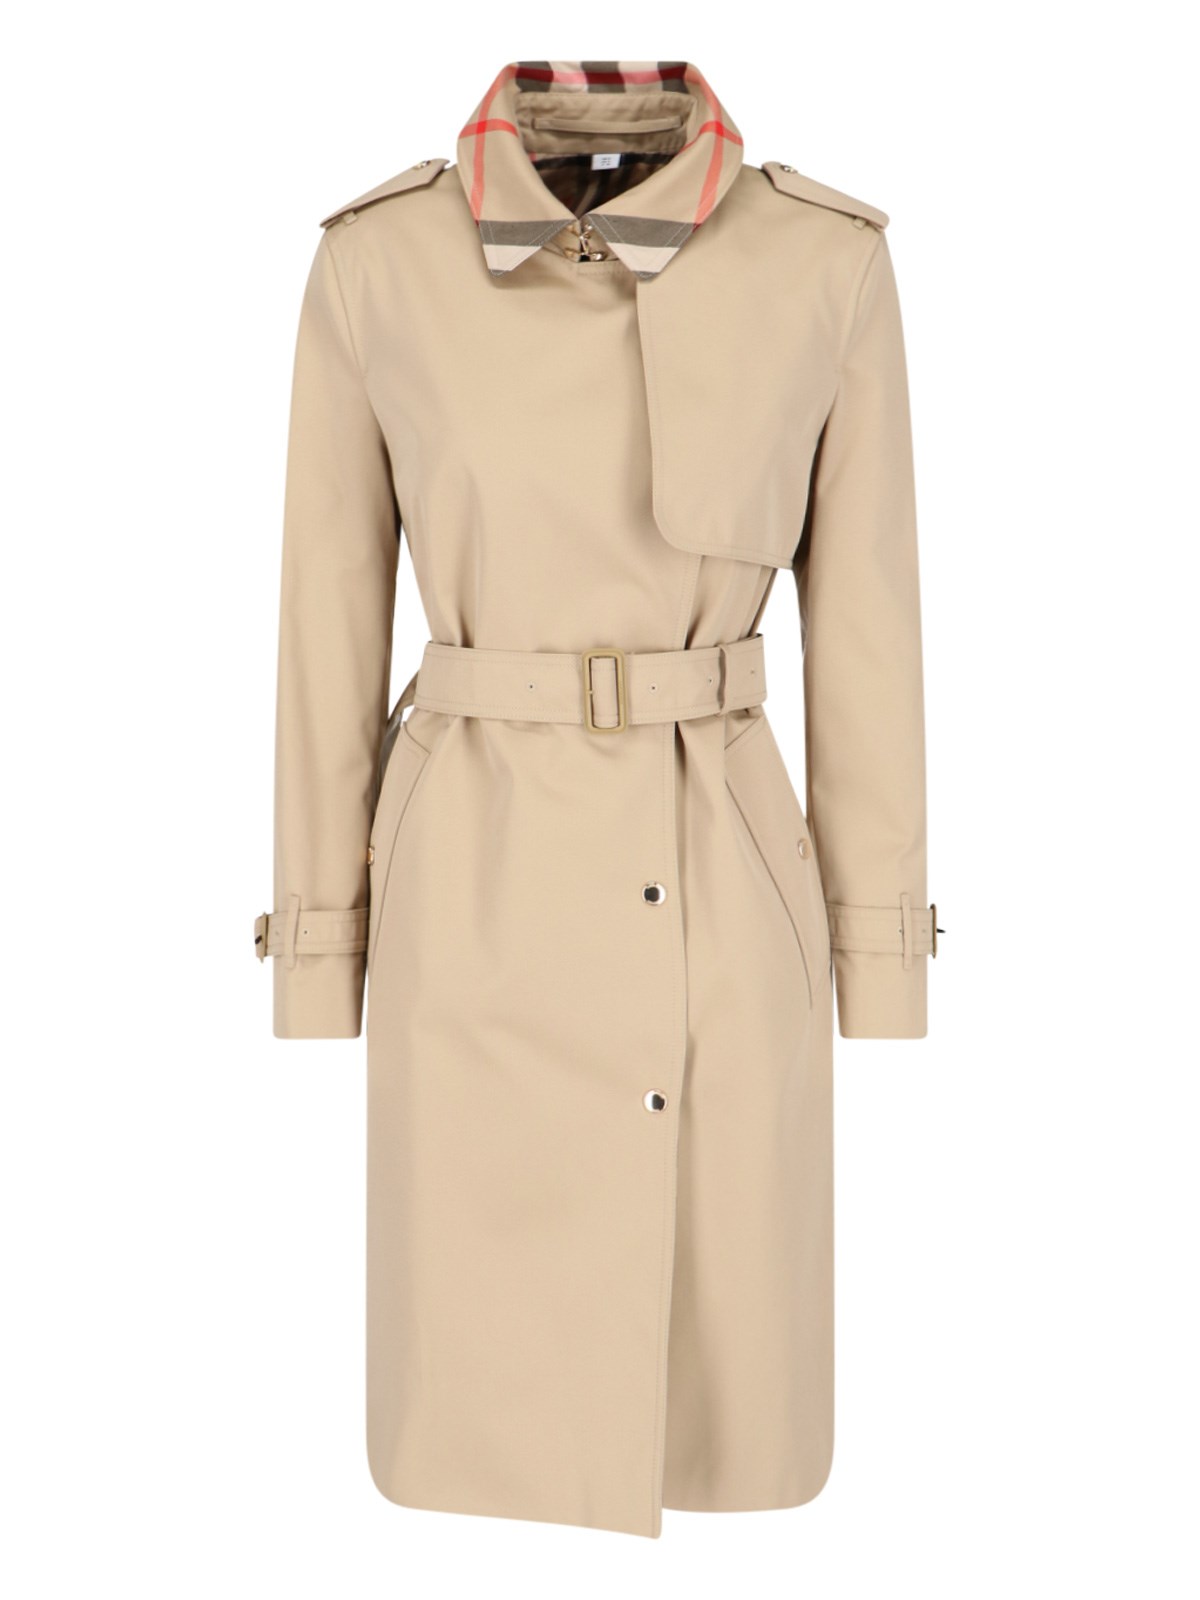 BURBERRY CHECK DETAILS TRENCH COAT